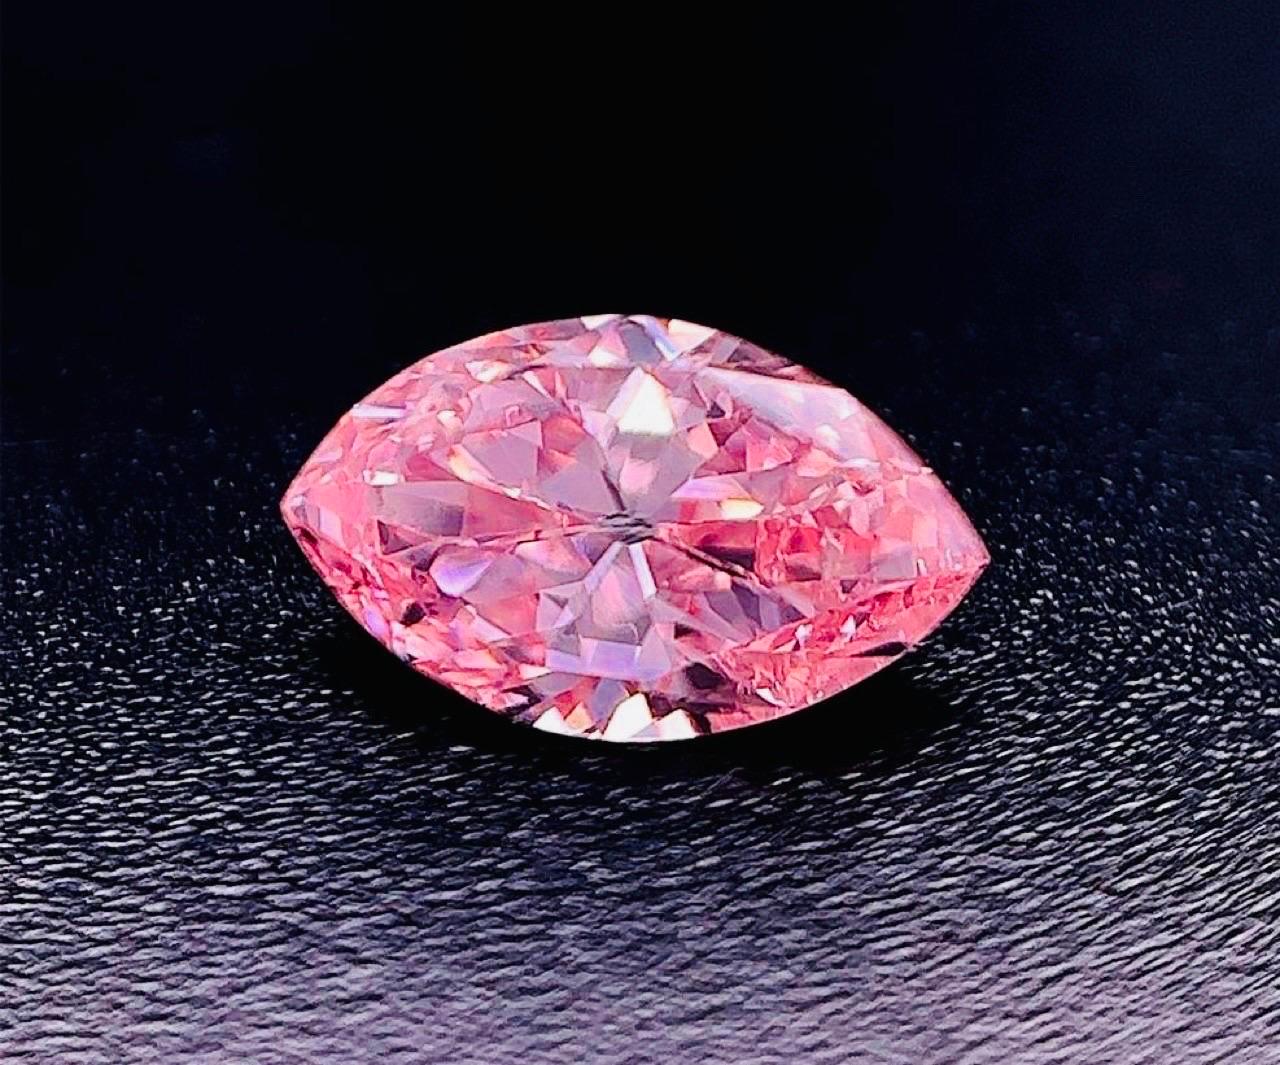 From Emilio Jewelry, a well known and respected wholesaler/dealer located on New York’s iconic Fifth Avenue, 
Featuring one of the rarest shapes, combined with the rarest color saturation of natural pink diamonds equals a perfect investment diamond!